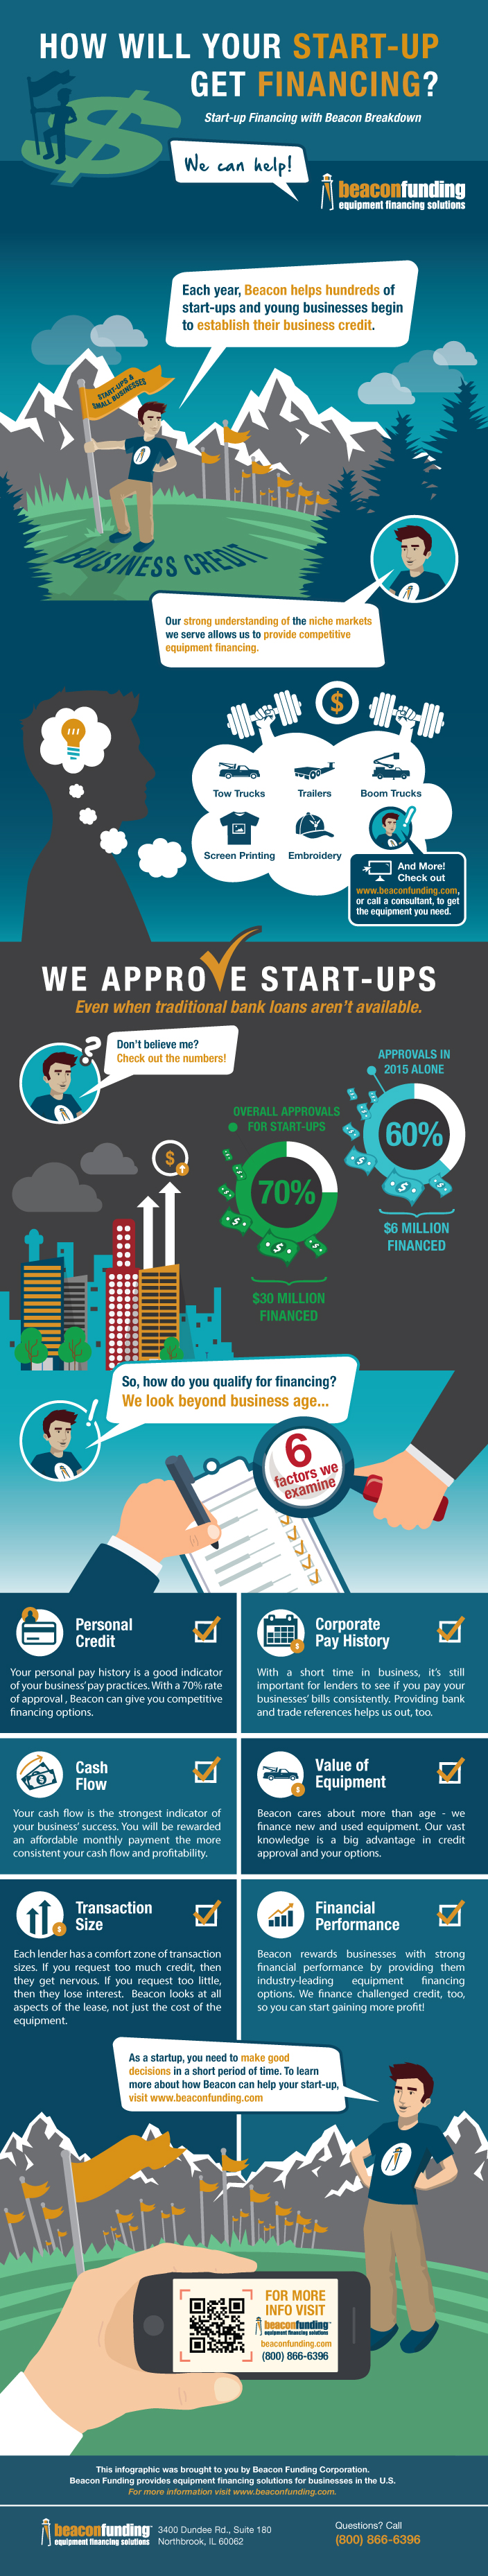 Infographic: How Does a Start-up Get Financing?